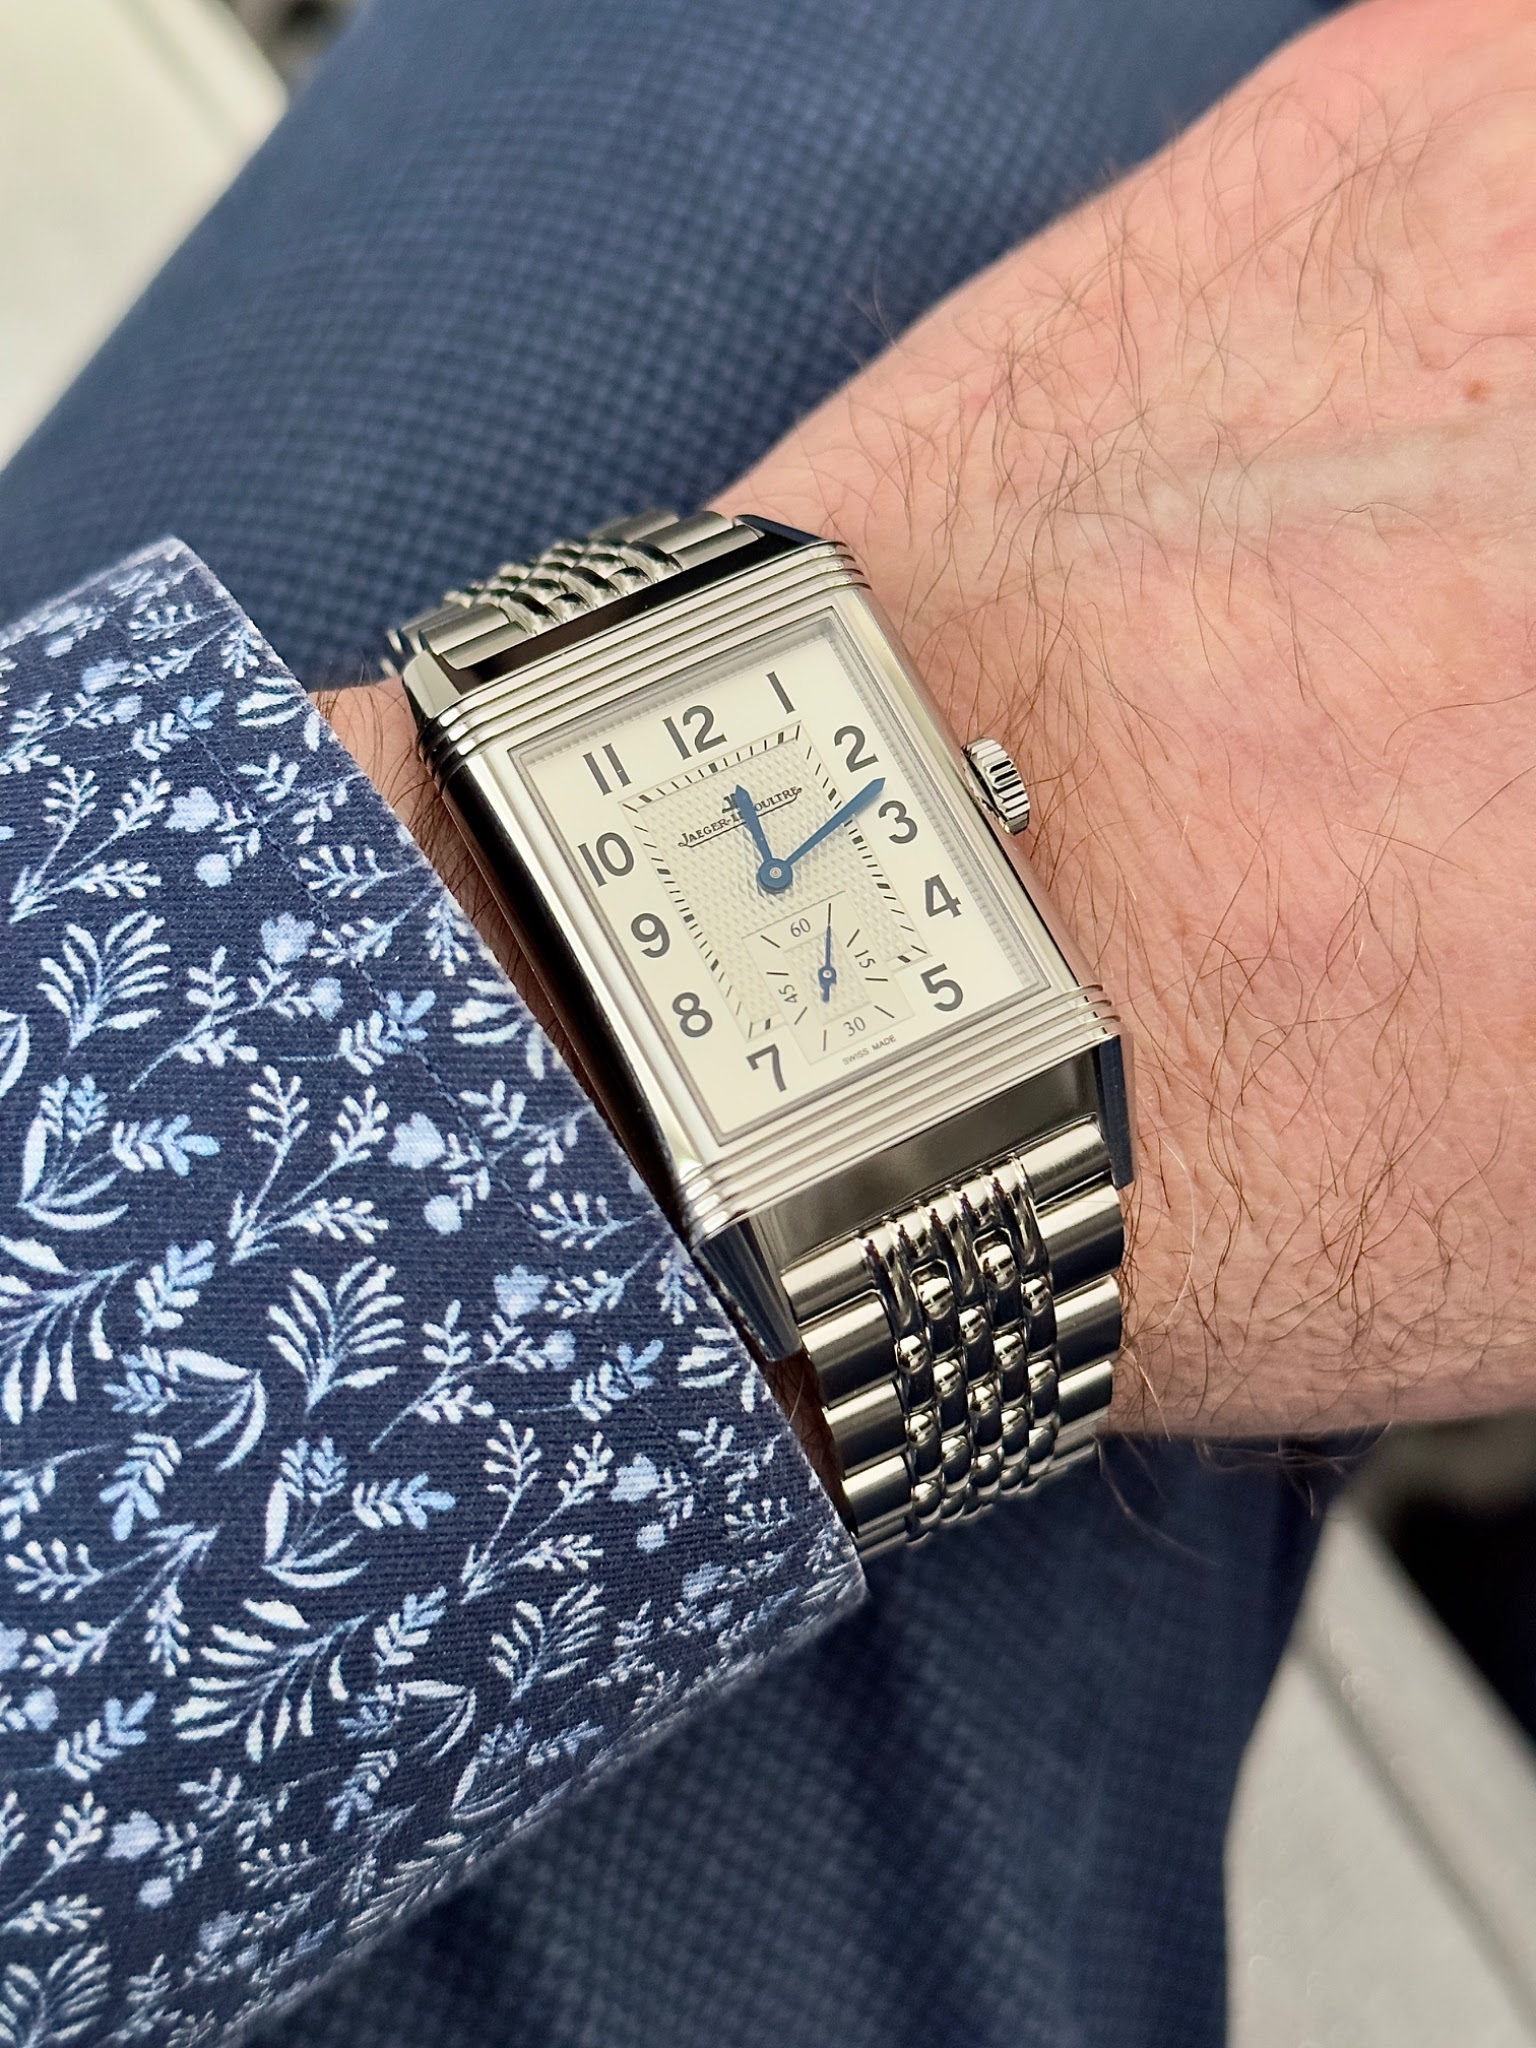 JLC] Reverso Duoface “Night and Day” : r/Watches